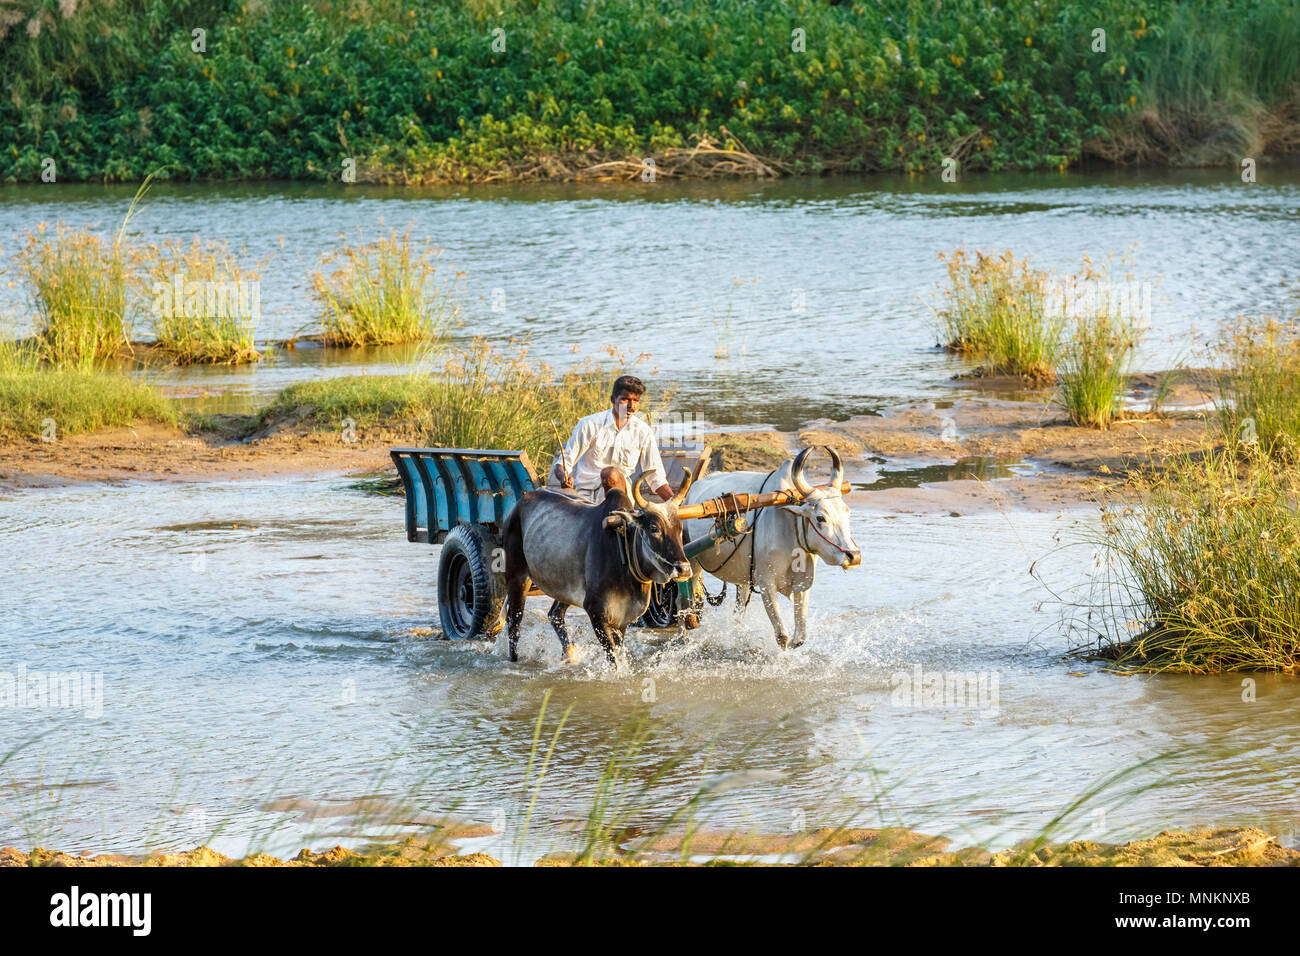 Bullock cart crossing the Vennar (a branch of the Cauvery) River Thanjavur, formerly Tanjore, a city in the south Indian state of Tamil Nadu, India Stock Photo